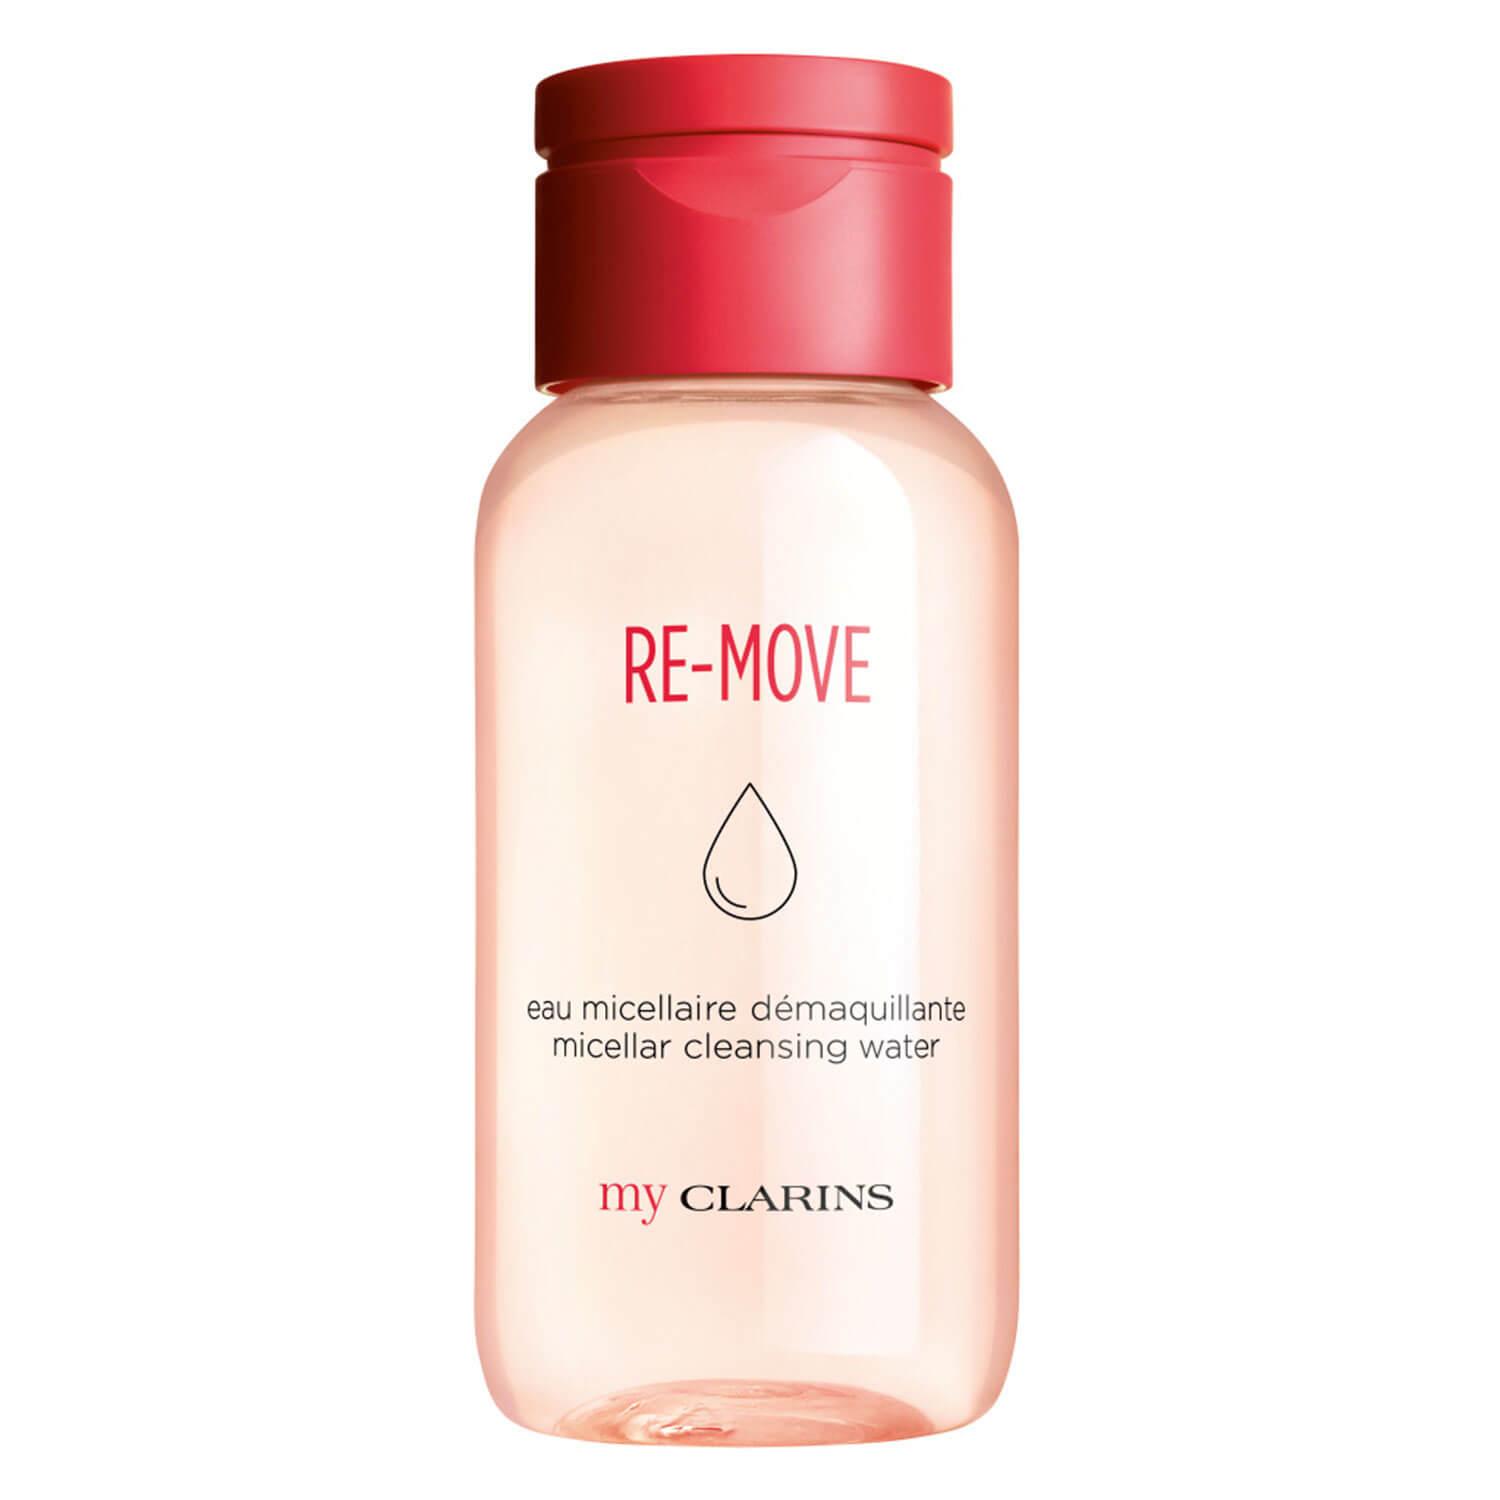 myCLARINS - RE-MOVE Micellar Cleansing Water